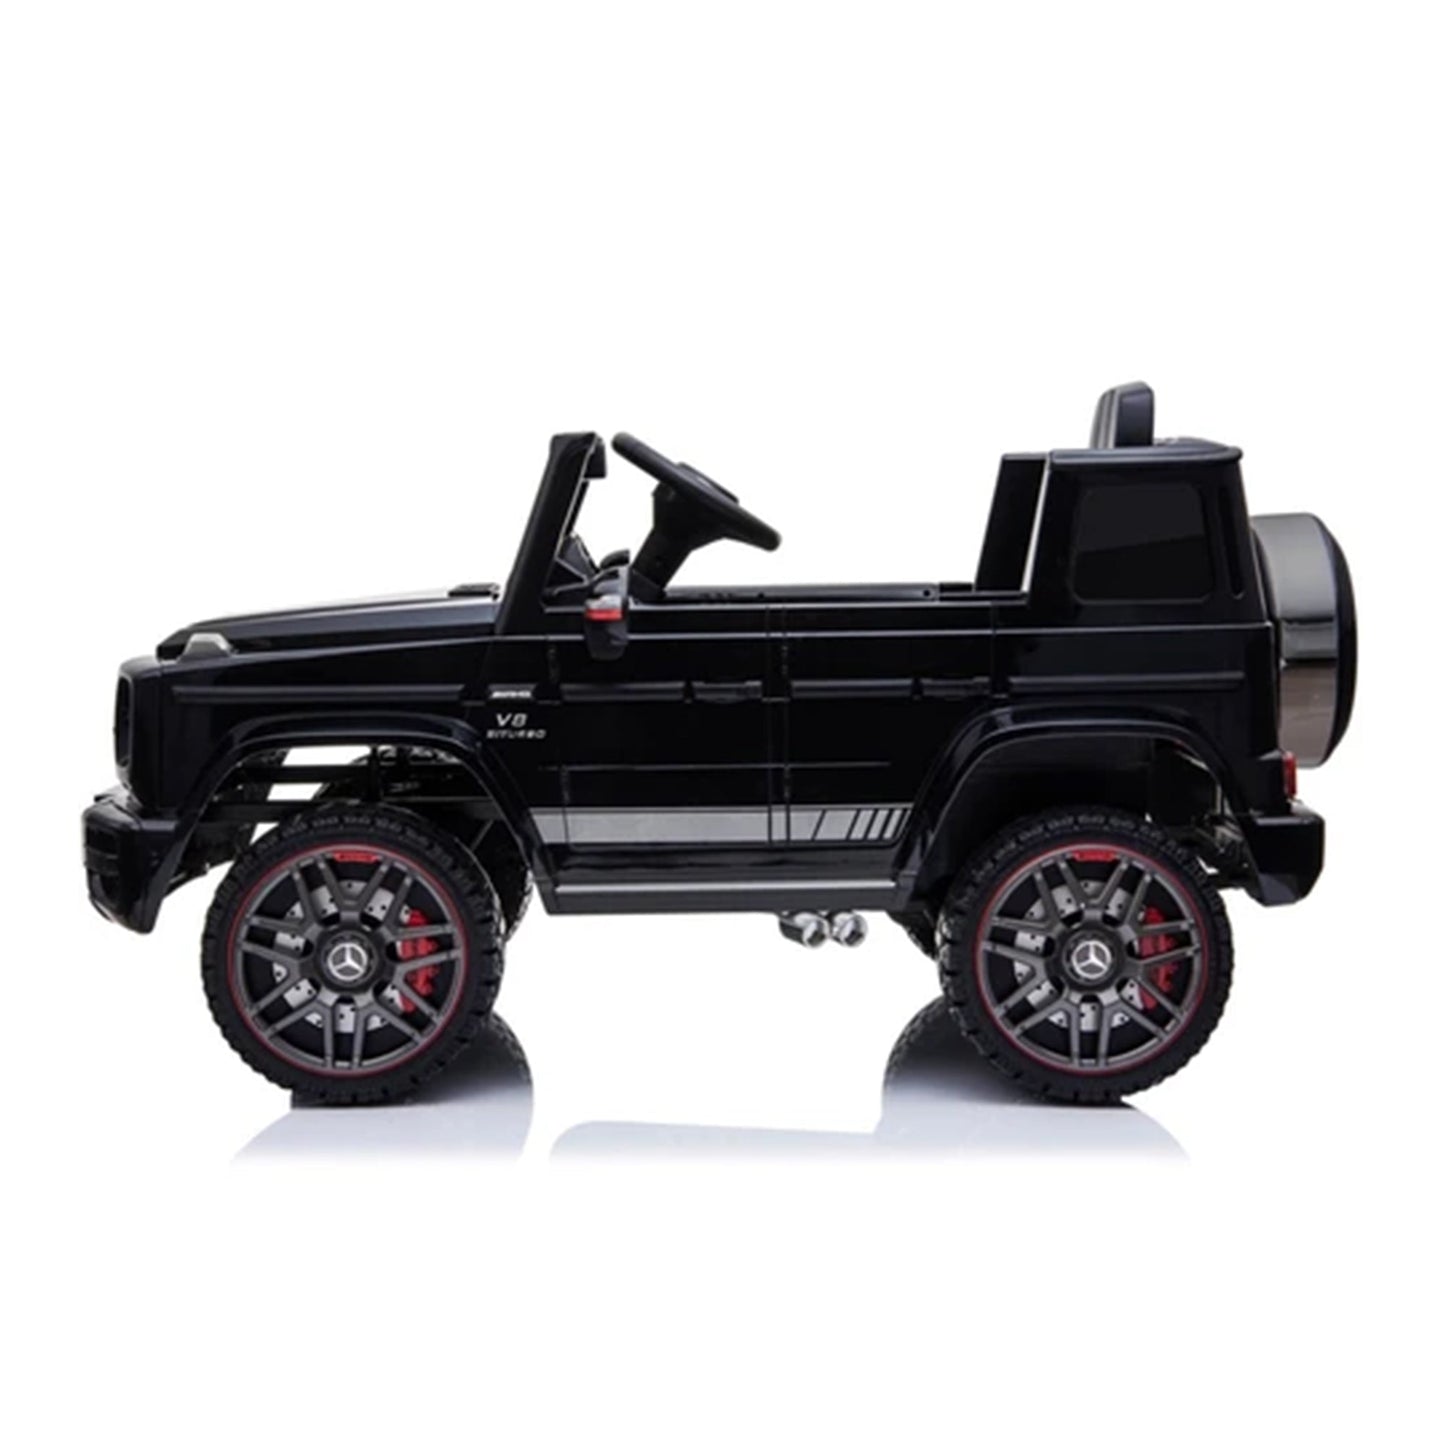 Black Mercedes G63 AMG 12 Volt electric ride-on toy car on a white background.